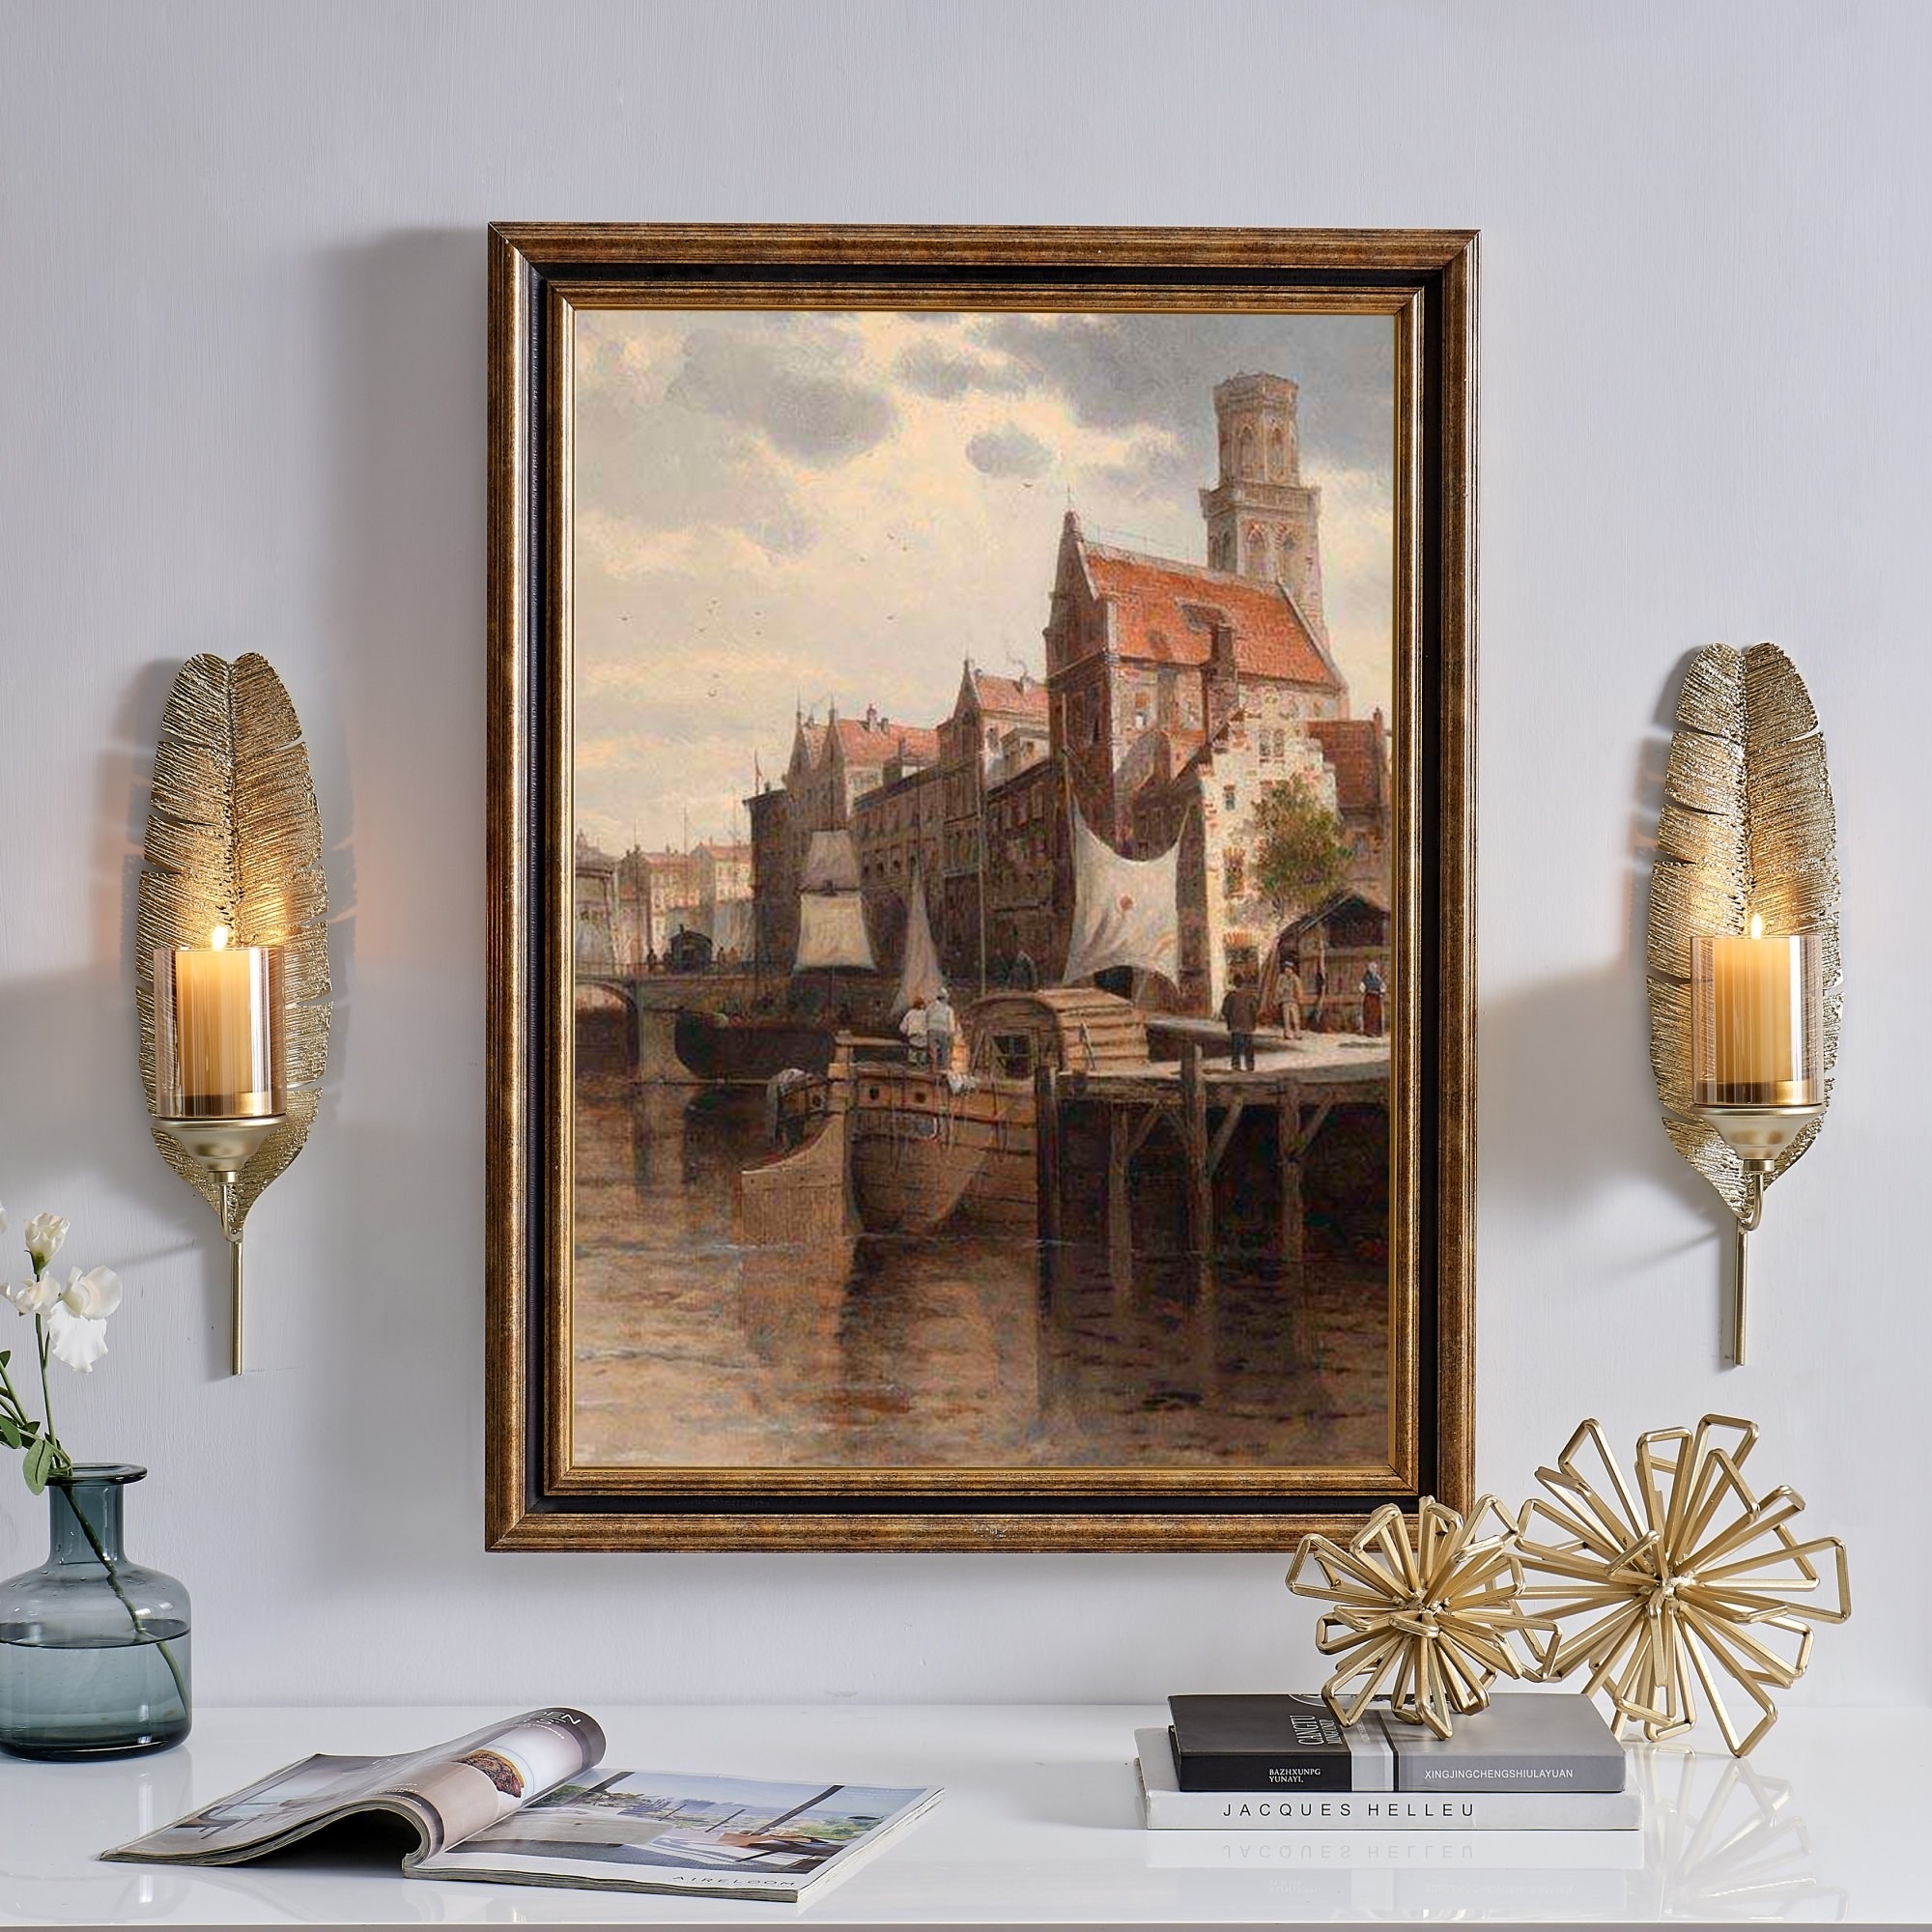 the two gold feather sconces hanging on a wall with a painting in between